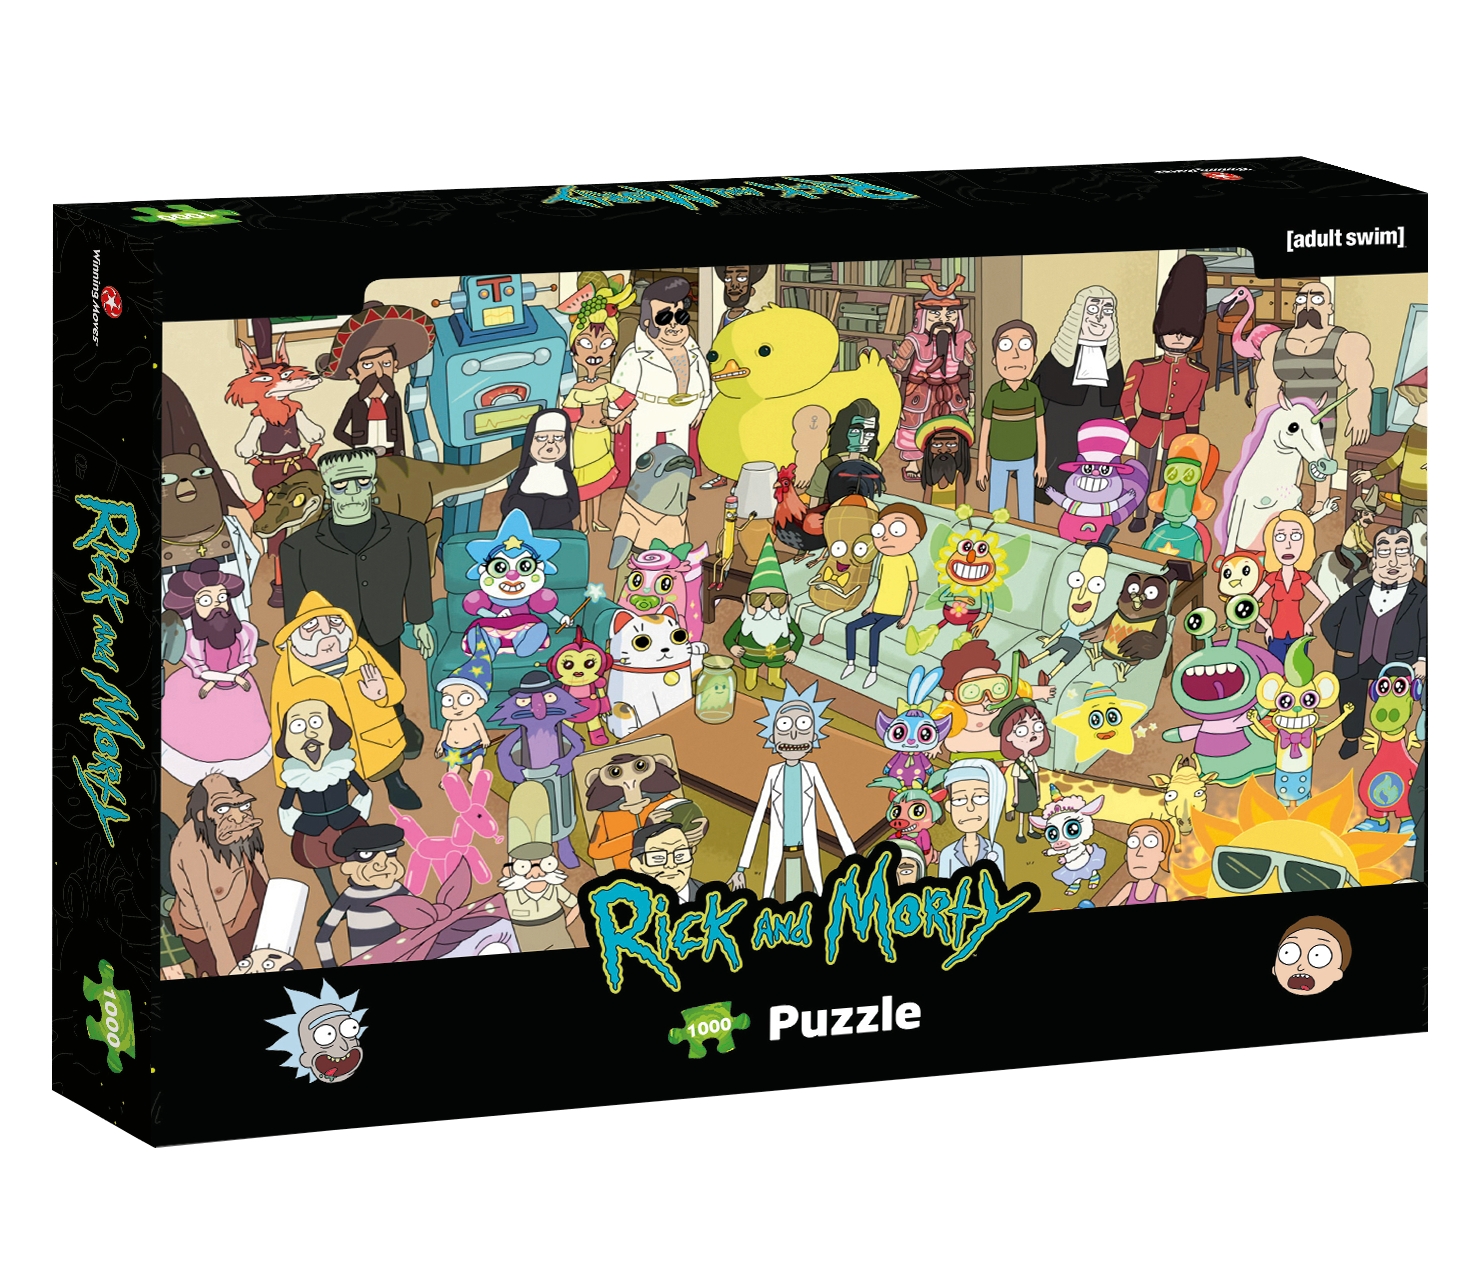 Puzzle 1000: Rick and Morty